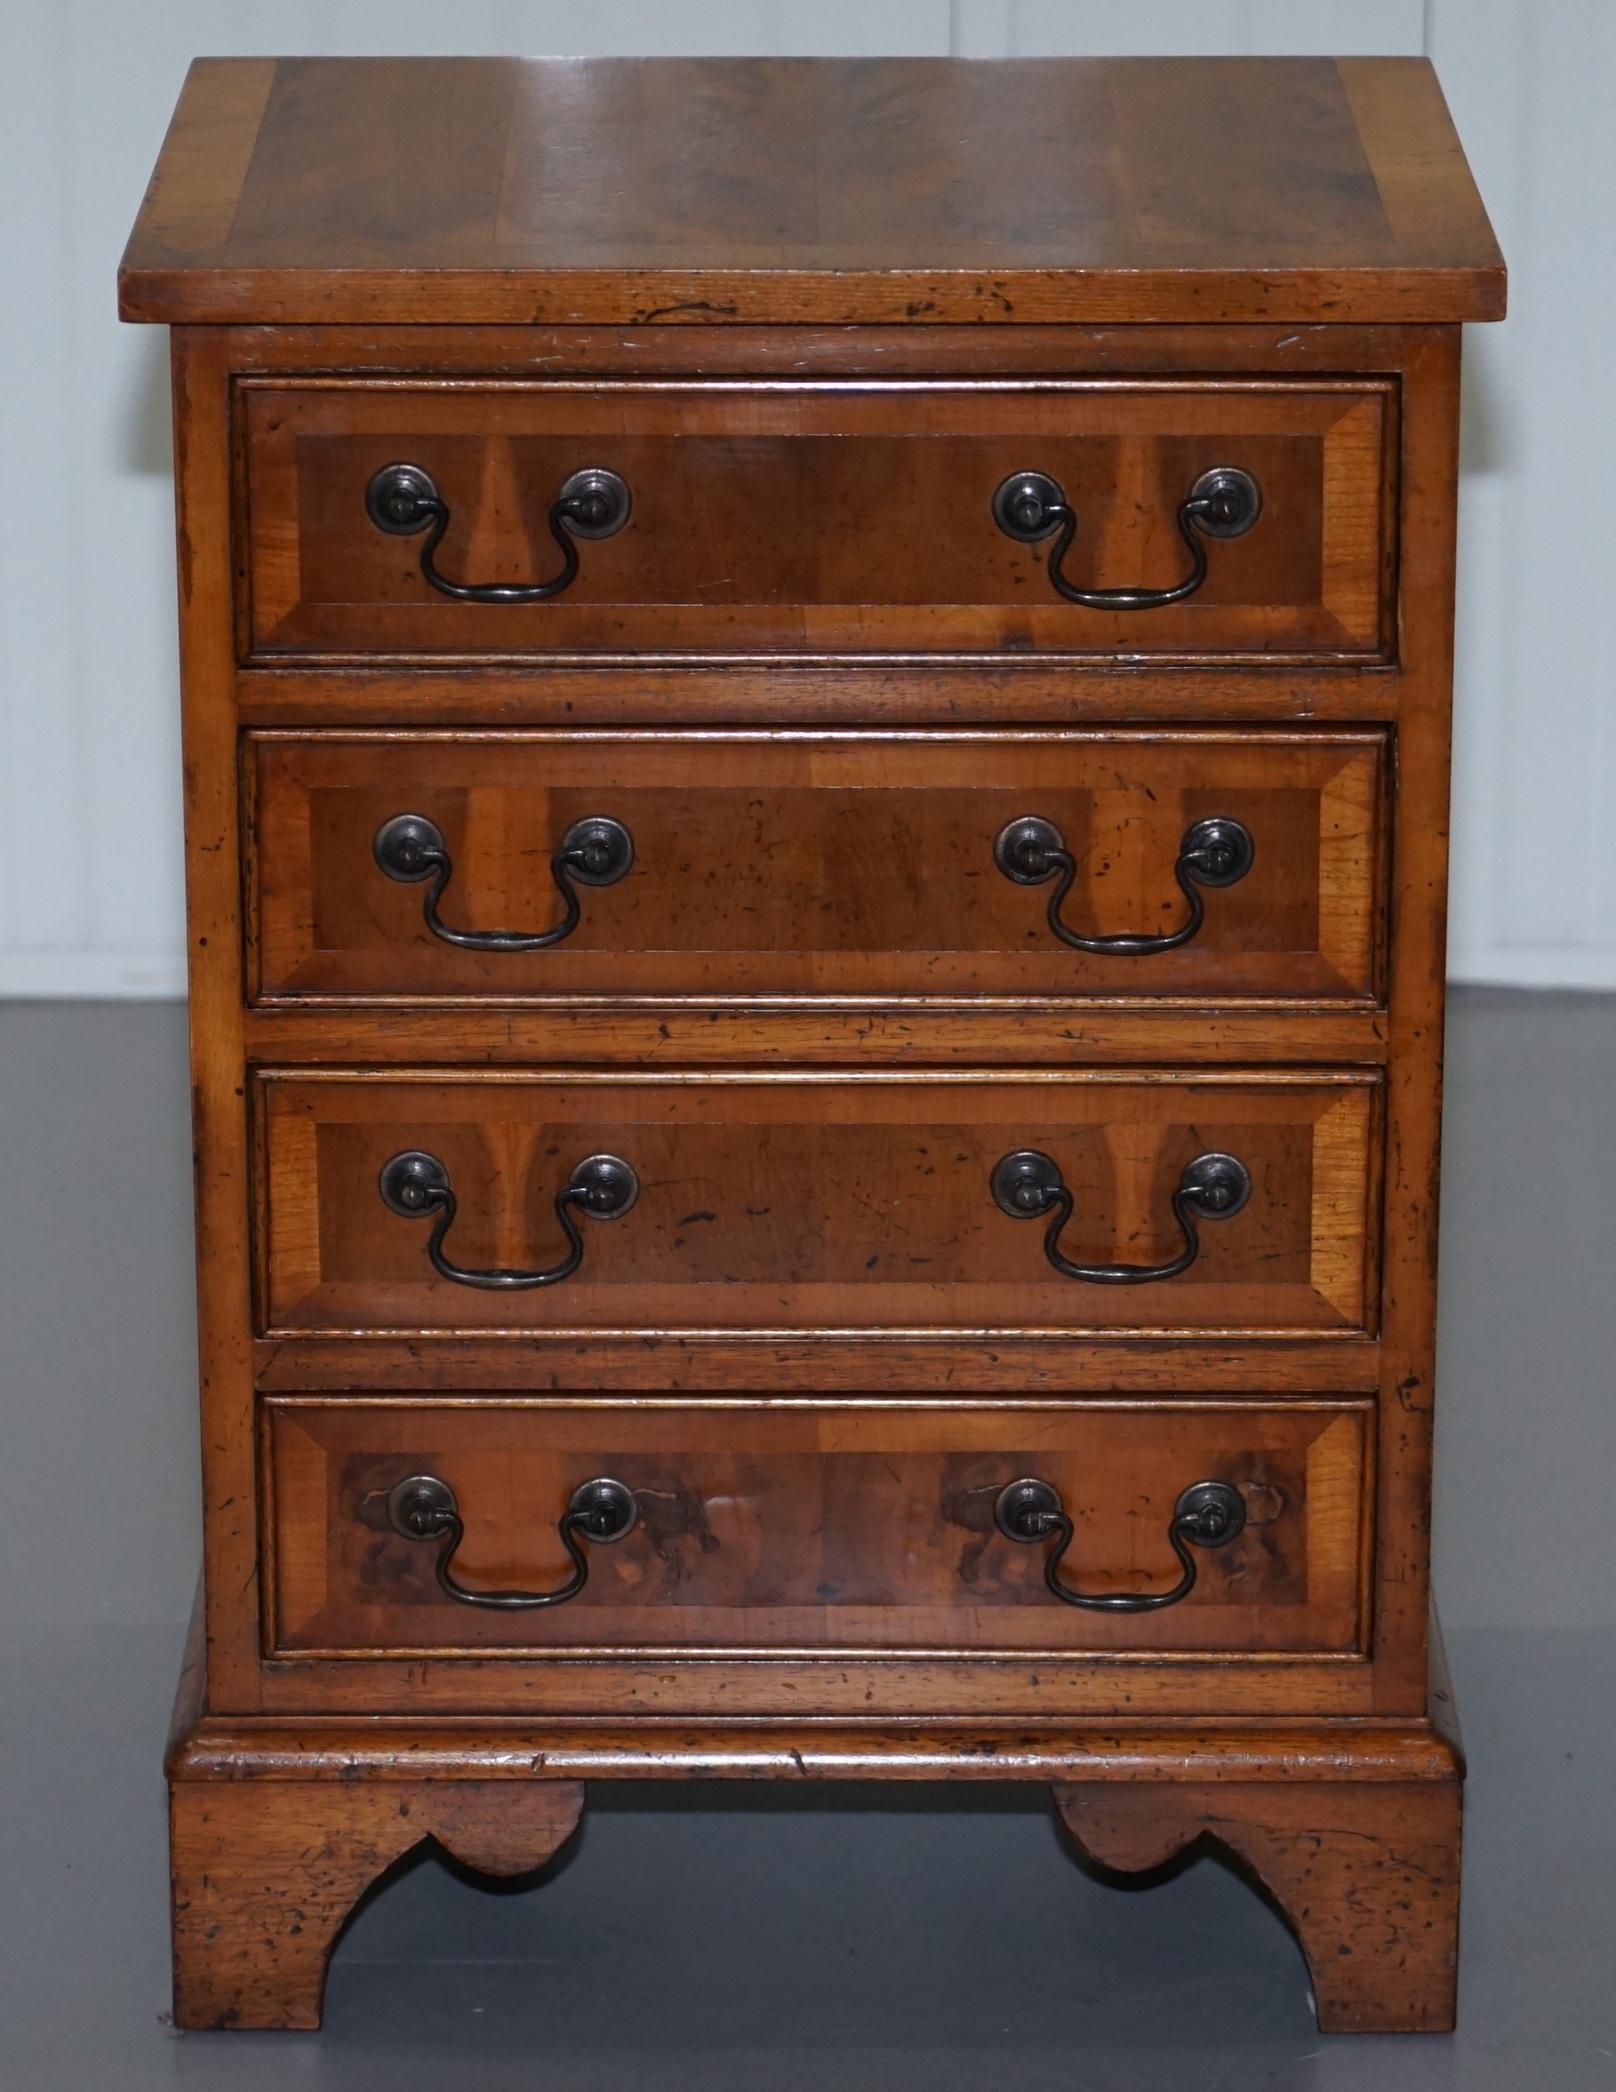 We are delighted to this very nice vintage Burr Yew small chest of drawers made in the Georgian style

A good looking and well made piece, it is very versatile, I see it being used as a luxury lamp or wine table but naturally it could be a bedside